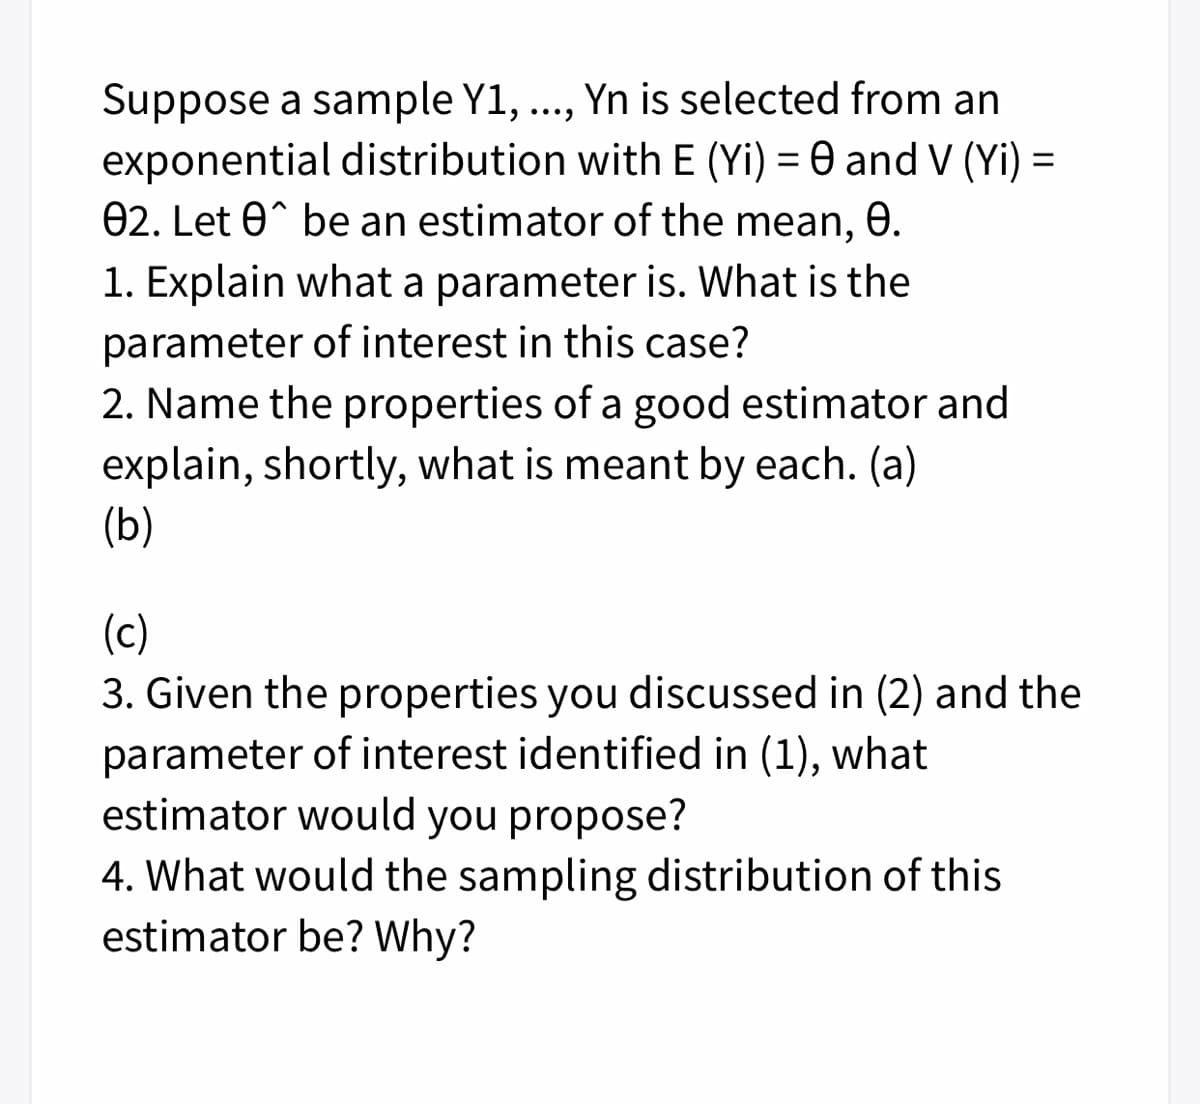 Suppose a sample Y1, ...,
exponential distribution with E (Yi) = 0 and V (Yi) =
02. Let 0^ be an estimator of the mean, 8.
Yn is selected from an
1. Explain what a parameter is. What is the
parameter of interest in this case?
2. Name the properties of a good estimator and
explain, shortly, what is meant by each. (a)
(b)
(c)
3. Given the properties you discussed in (2) and the
parameter of interest identified in (1), what
estimator would you propose?
4. What would the sampling distribution of this
estimator be? Why?
